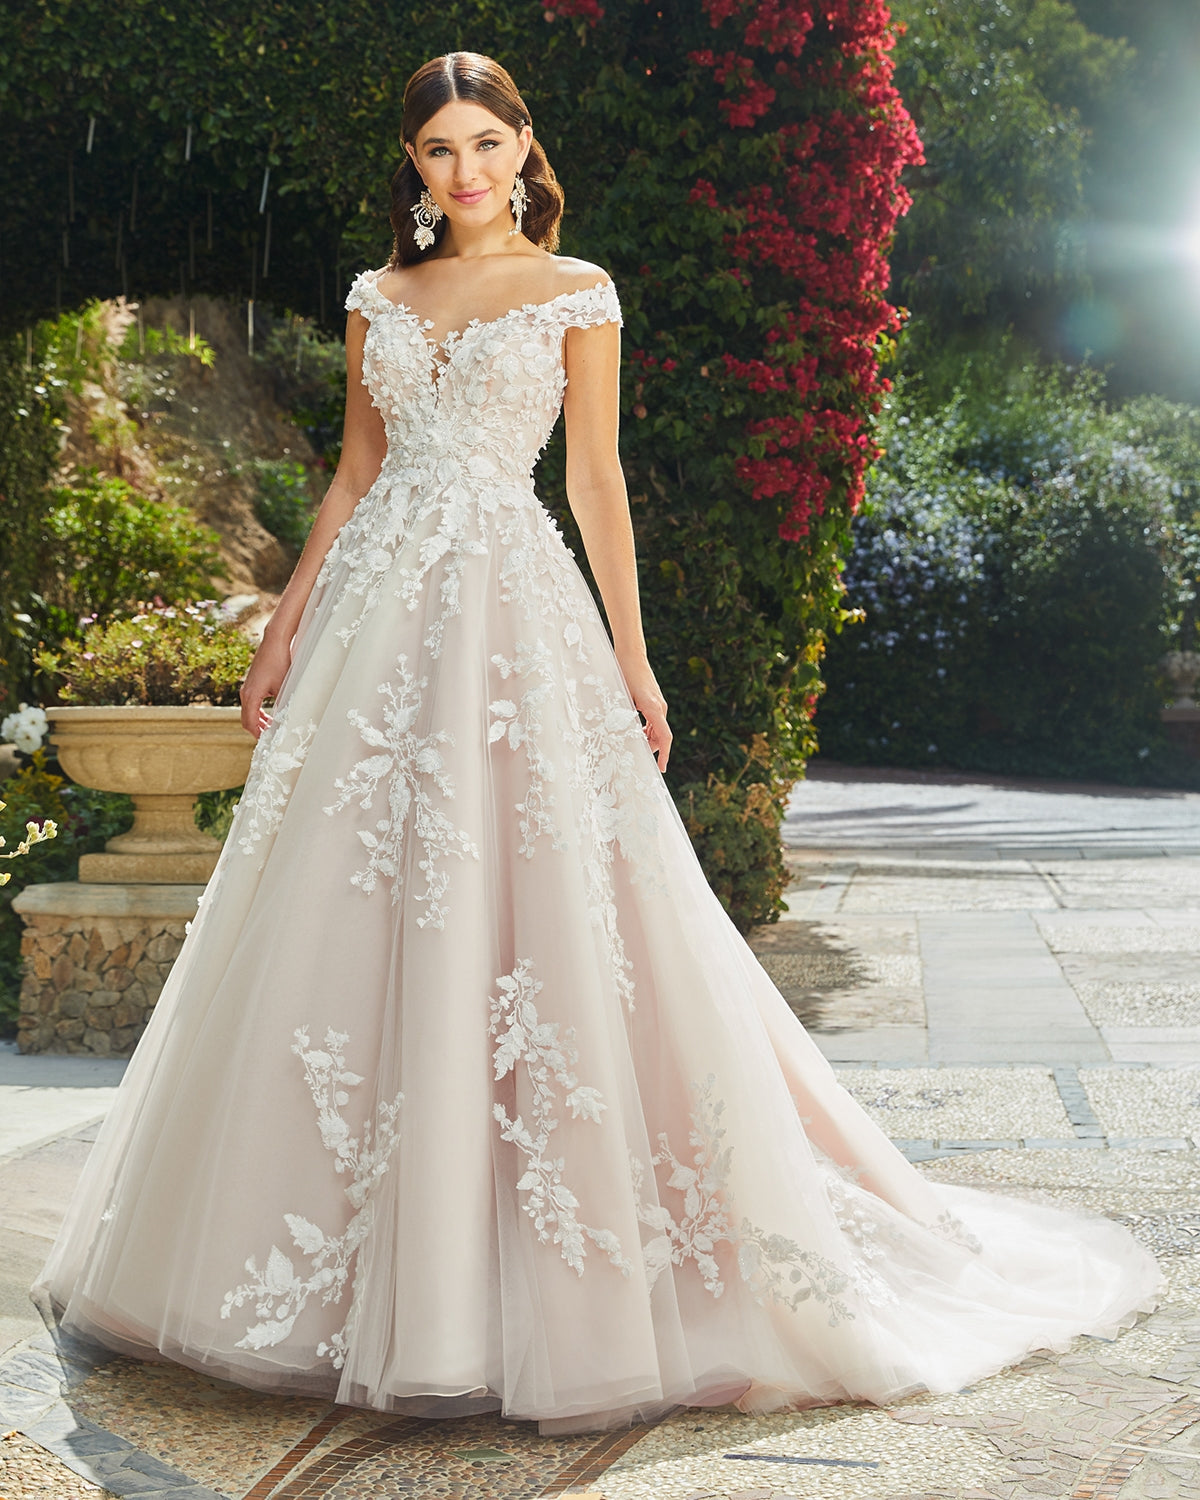 Casablanca Bridal 2406 EVELINA Off the shoulder wedding dress ballgown Bridal Gown. Modern-feminine-chic never looked better than Style 2406 Evelina by Casablanca Bridal. Bold and soft all at once, this classic ballgown wedding dress features a breathtaking sweetheart neckline and off-shoulder sleeves, delicately covered in blooming 3D floral lace. An illusion keyhole back opens up to frame a dreamy row of buttons,